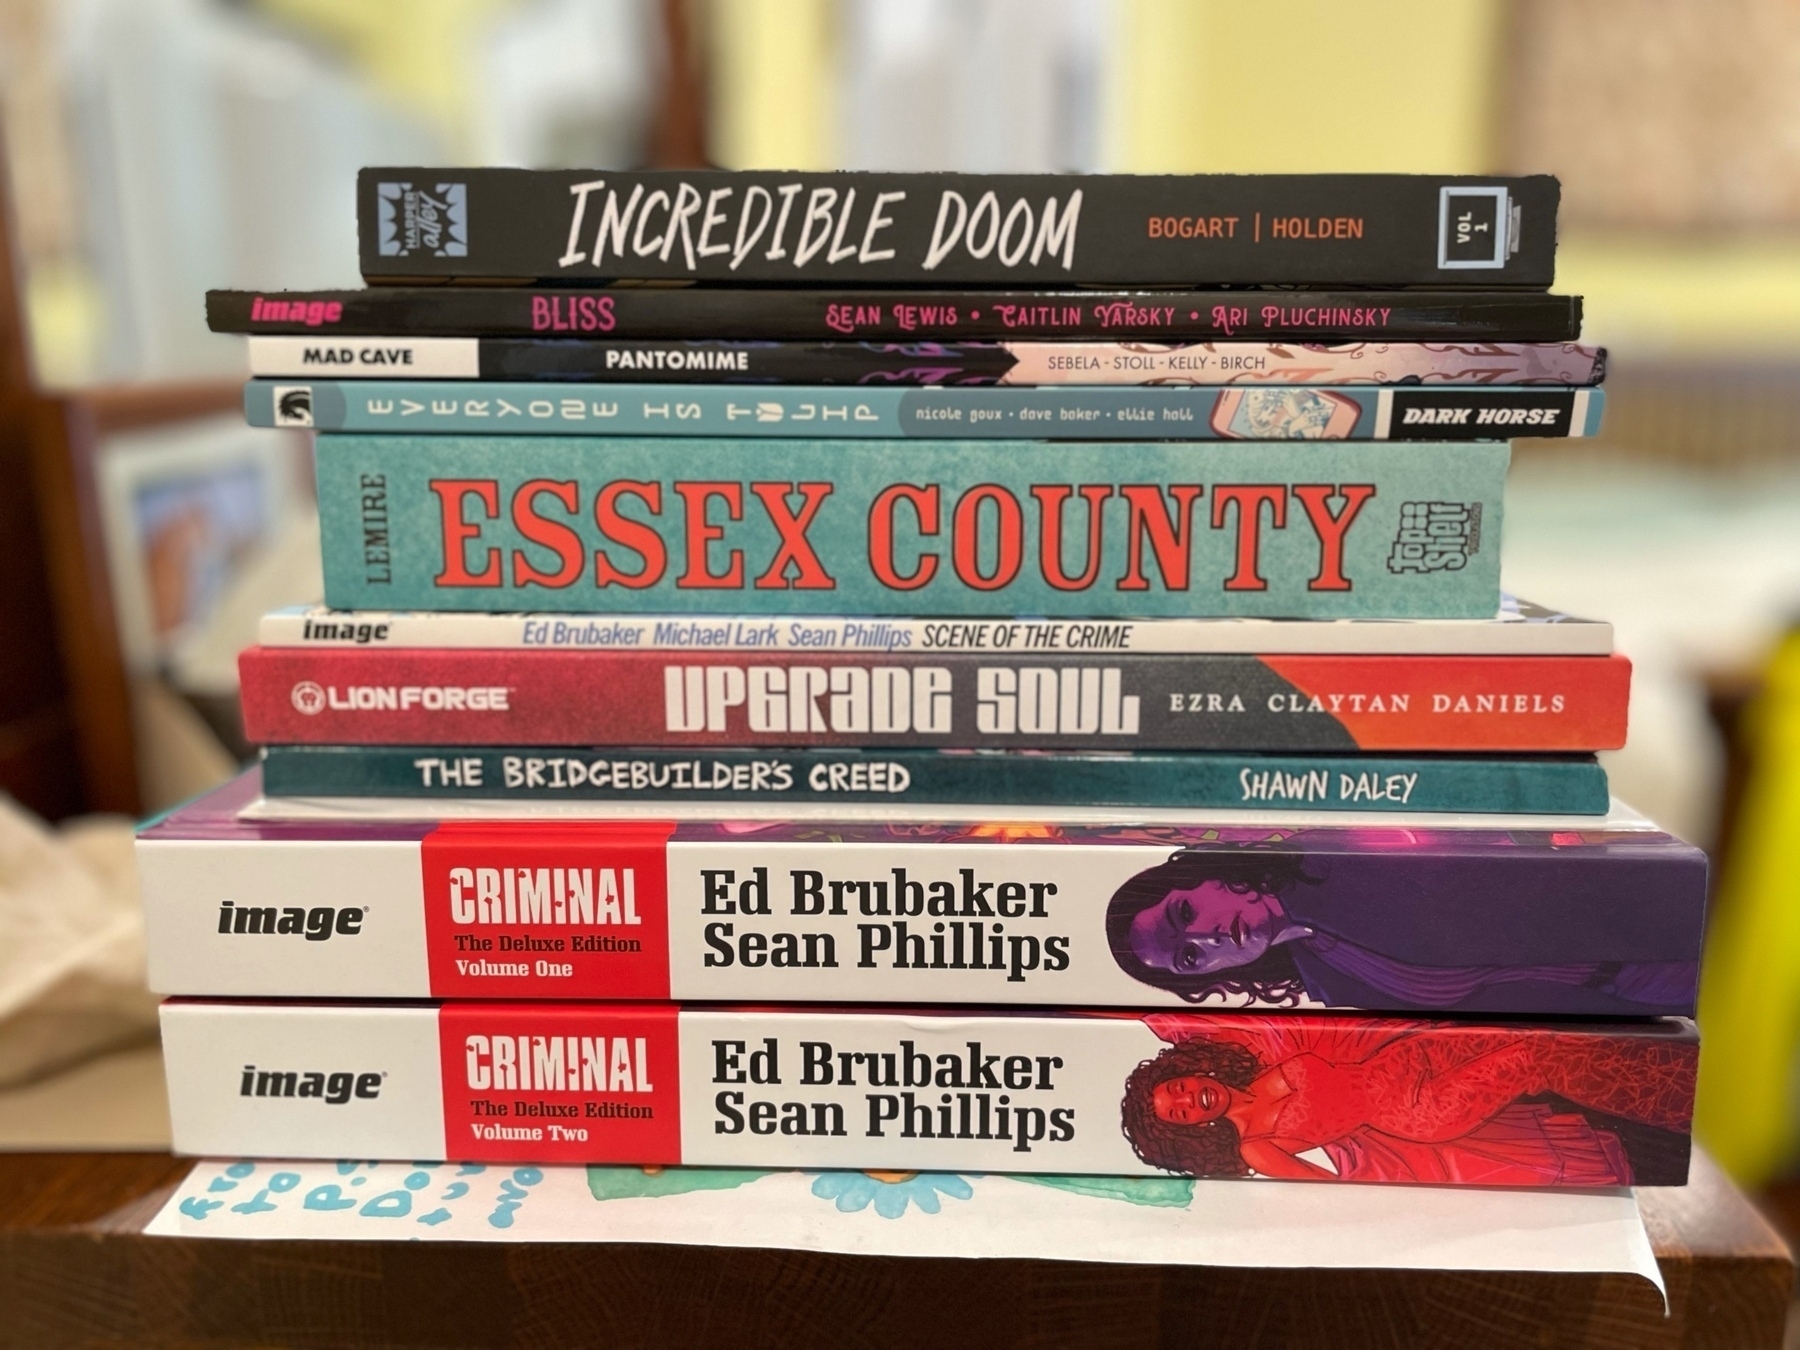 Stack of graphic novels, top to bottom: Incredible Doom, Bliss, Pantomime, Everyone Is Tulip, Essex County, Scene of the Crime, Upgrade Soul, The Bridgebuilder's Creed, Criminal Deluxe Editions Volumes 1 and 2